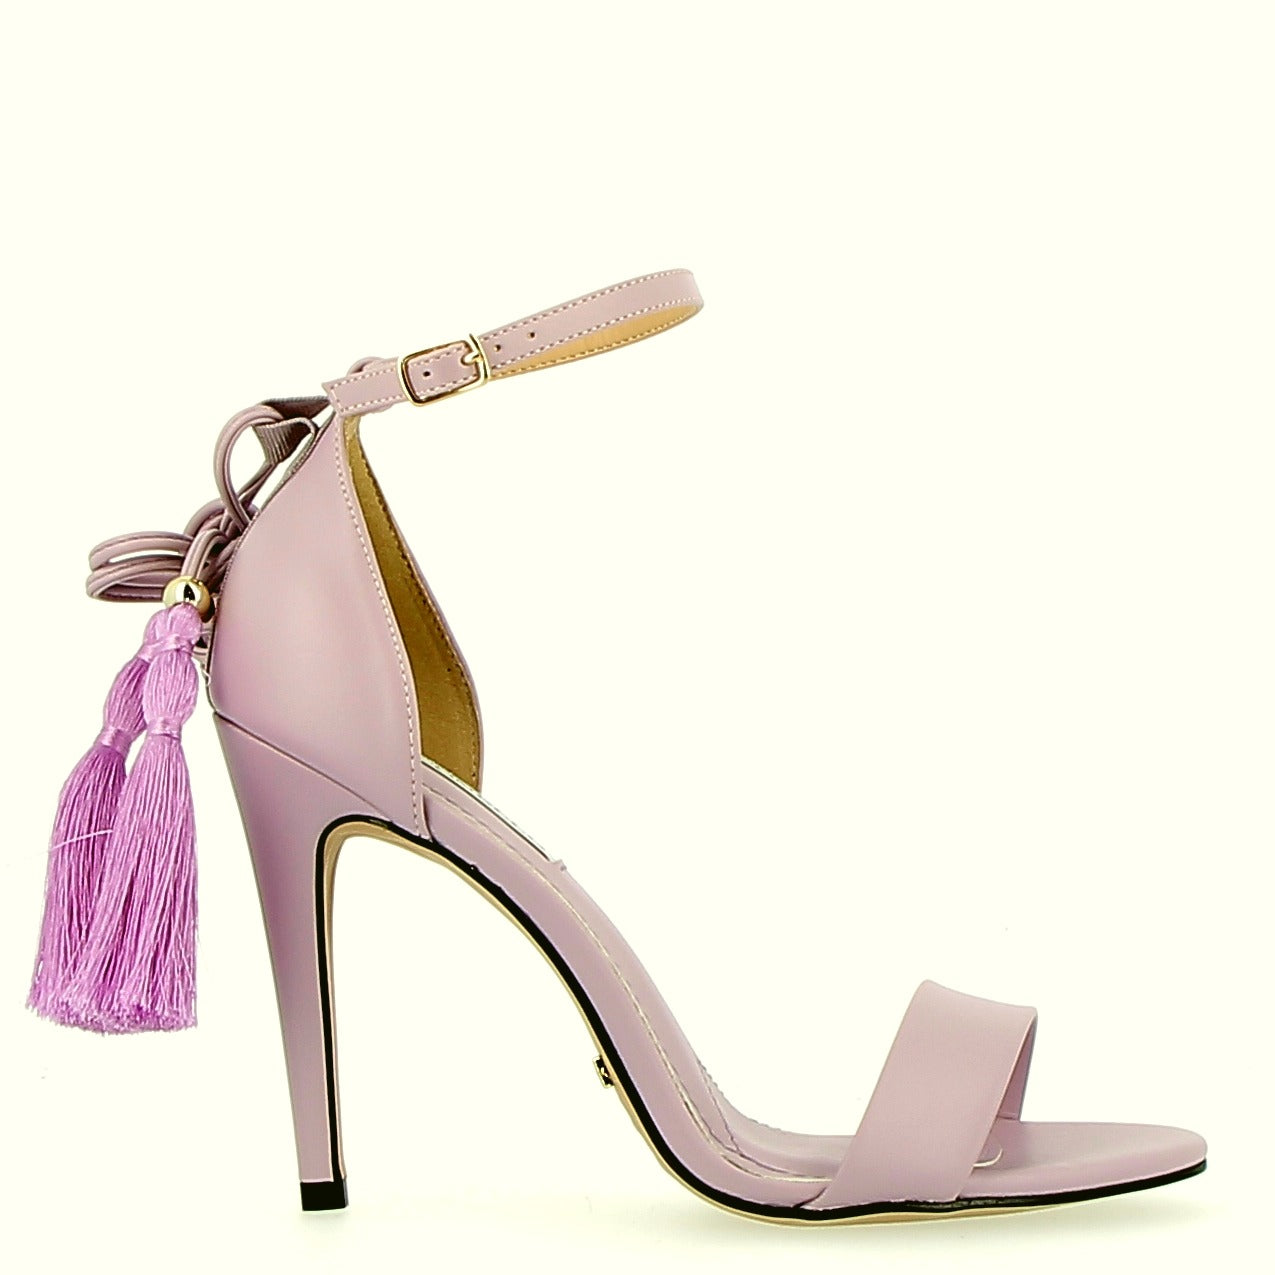 Lilac pink sandal on heel with pom pom lace